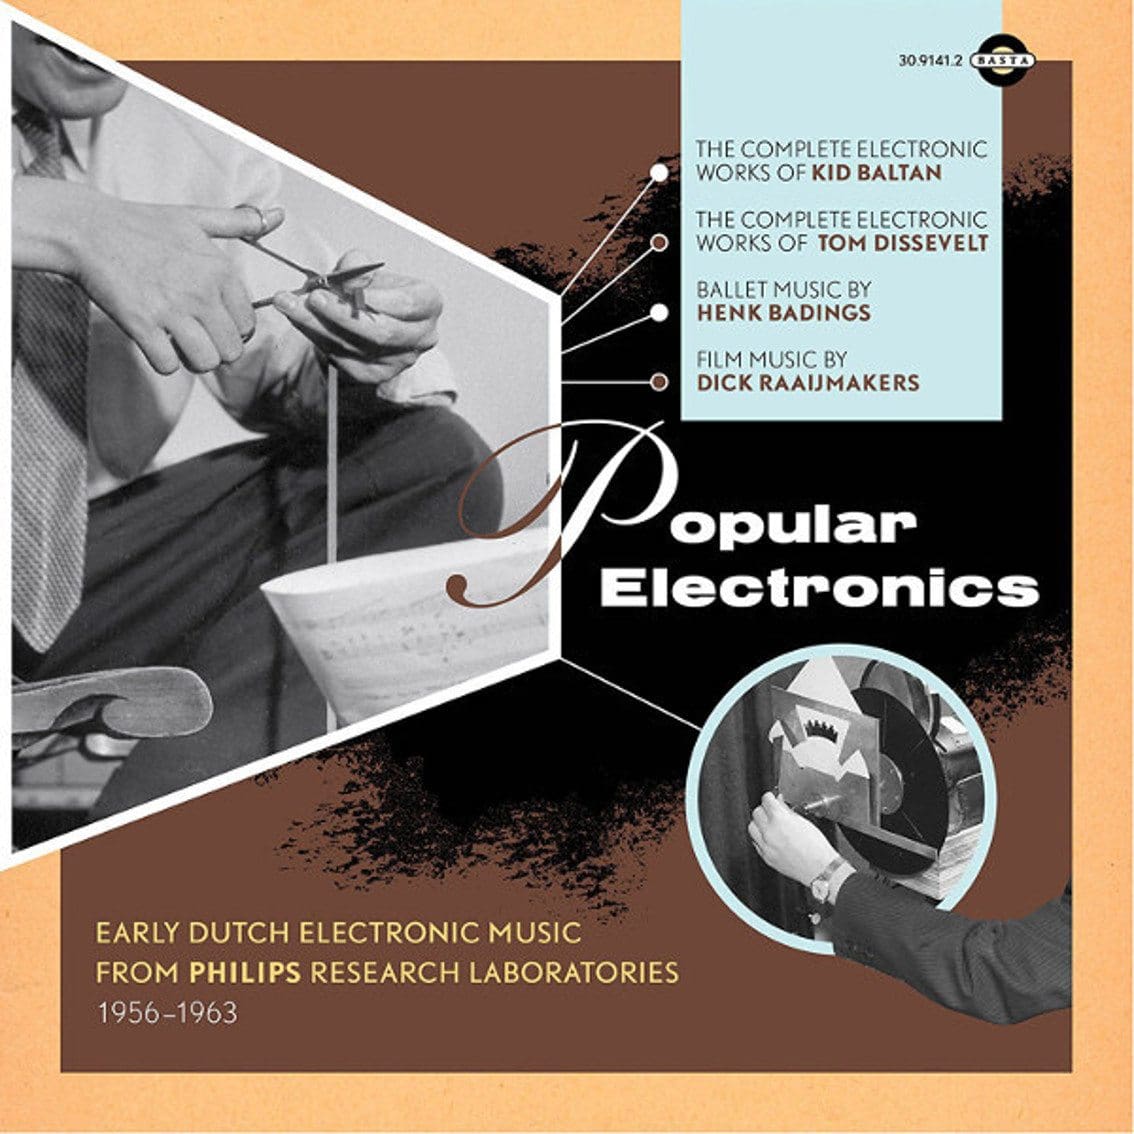 Legendary Dutch electronic music composers packaged in a 4CD deluxe box (recorded in the Philips Research Laboratories in the period 1956-1963)